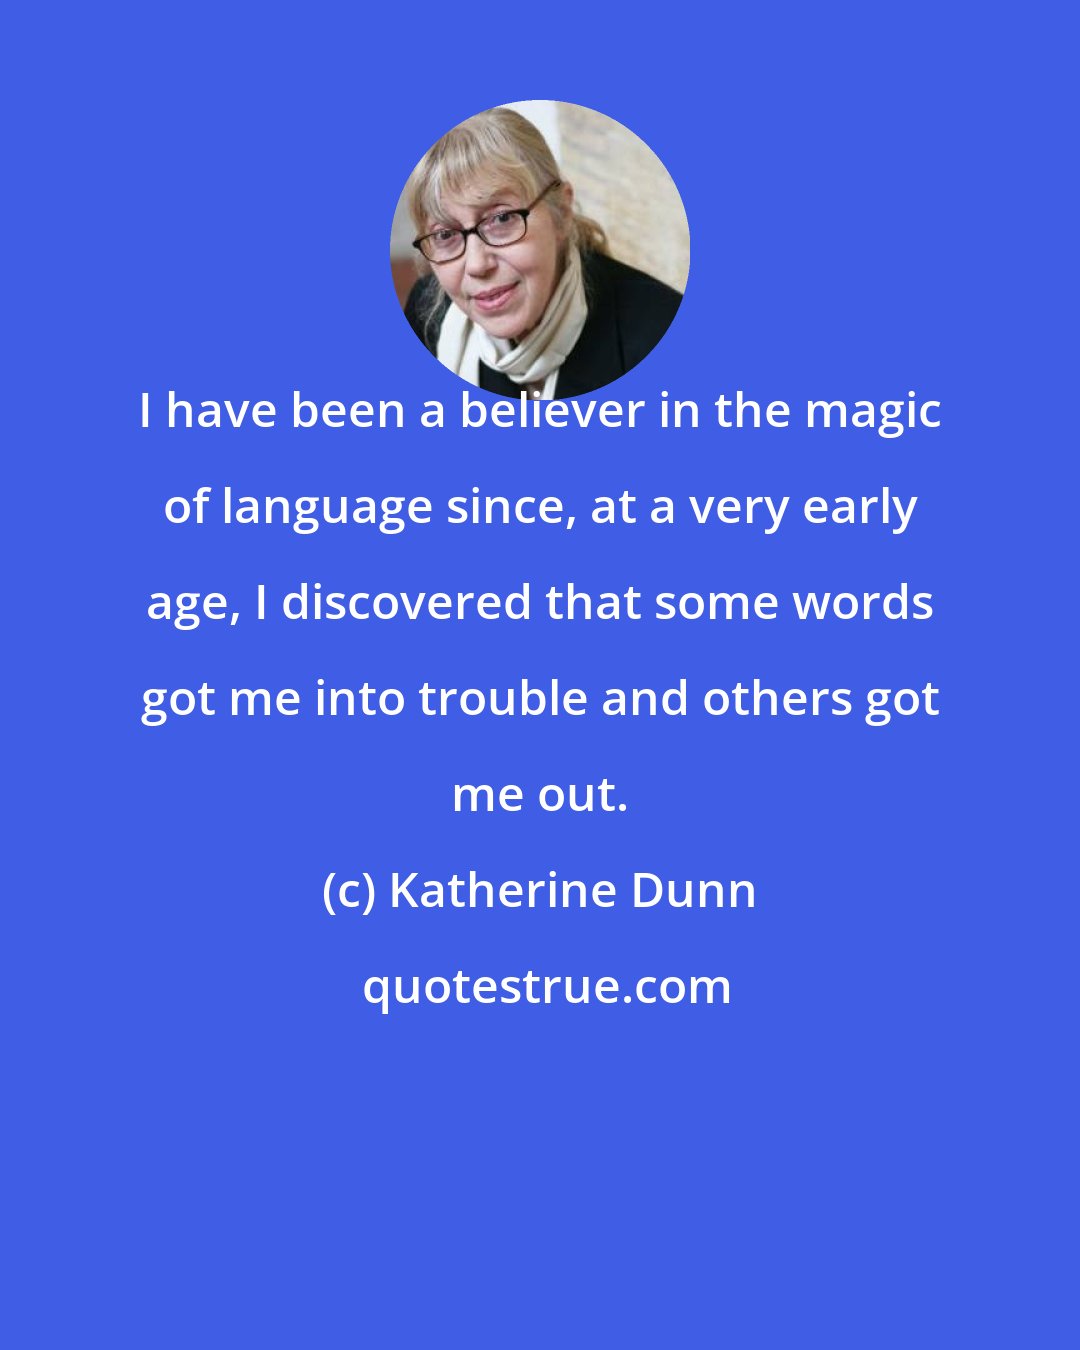 Katherine Dunn: I have been a believer in the magic of language since, at a very early age, I discovered that some words got me into trouble and others got me out.